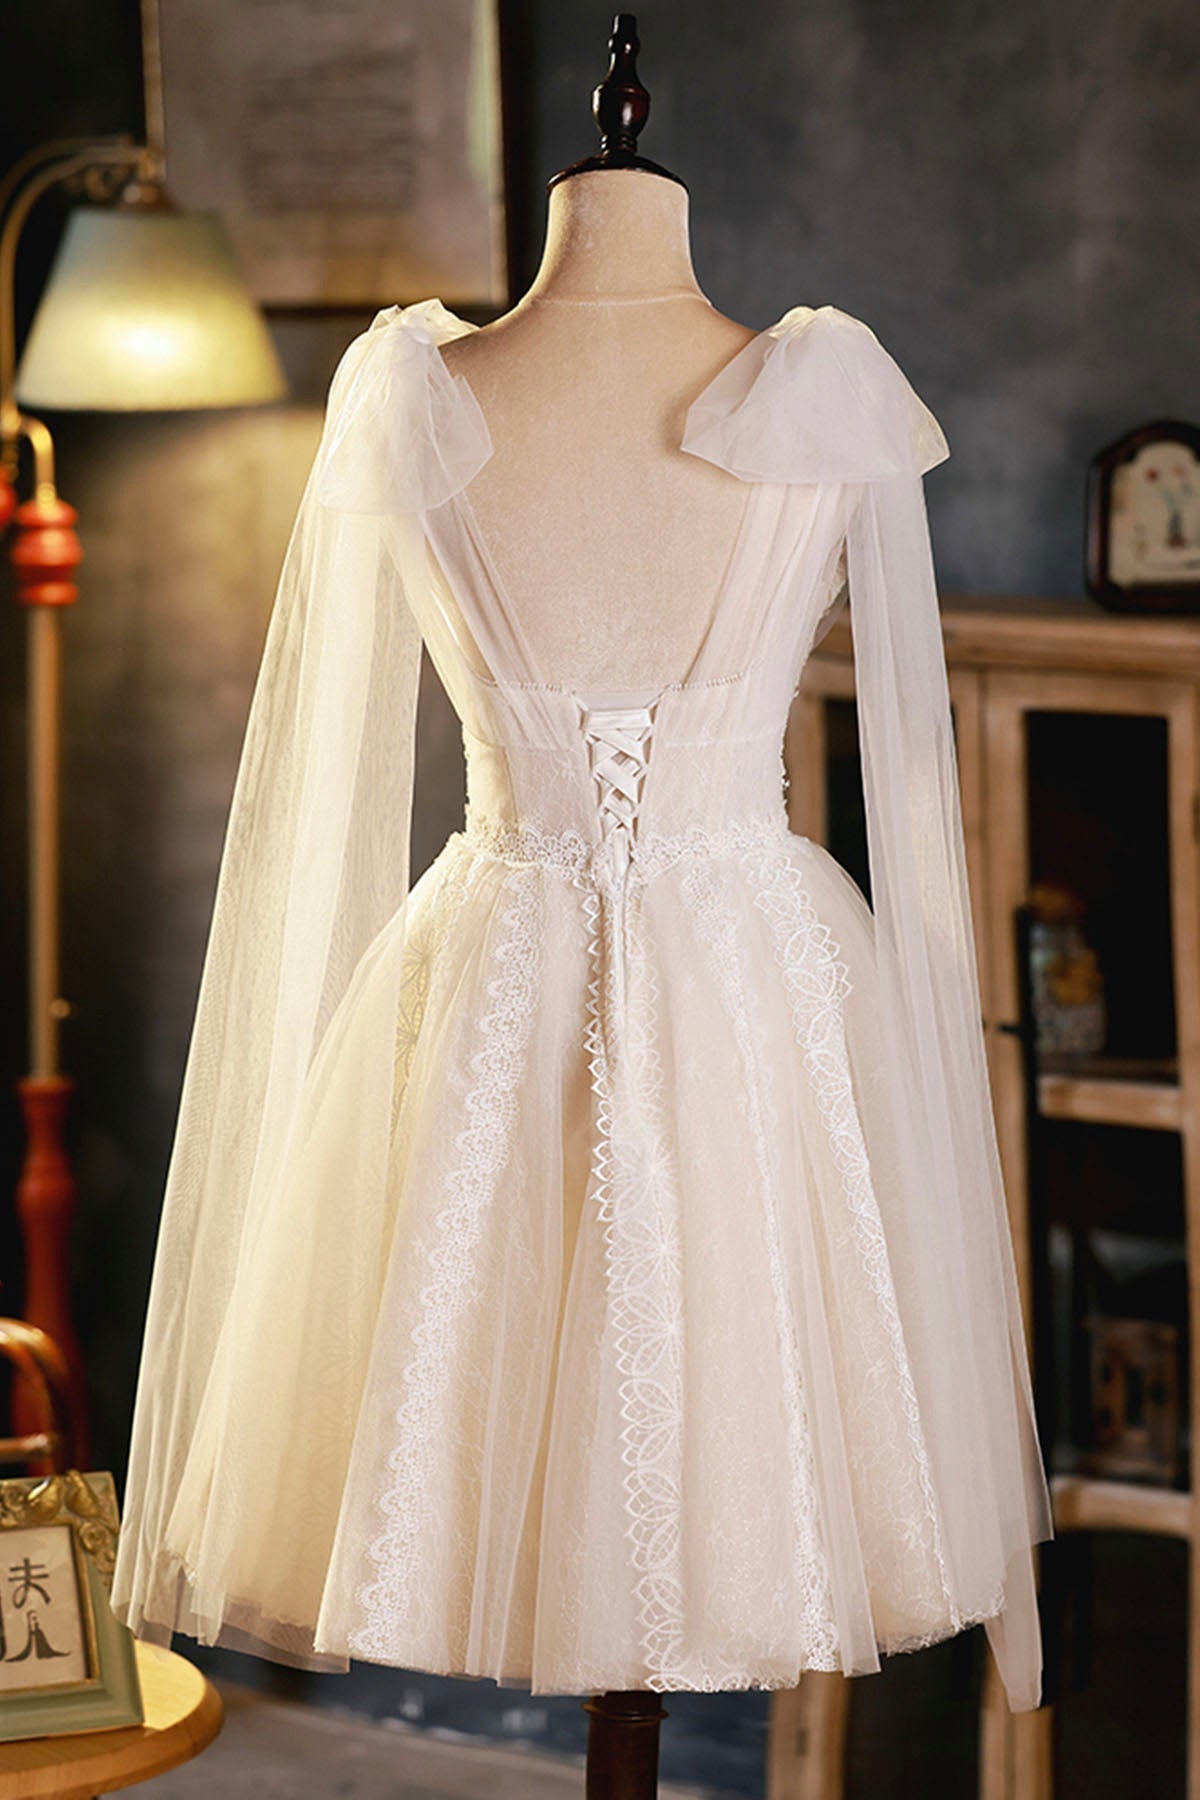 Prom Dress Shopping Near Me, Champagne V-Neck Lace Short Prom Dress, Lovely A-Line Evening Party Dress